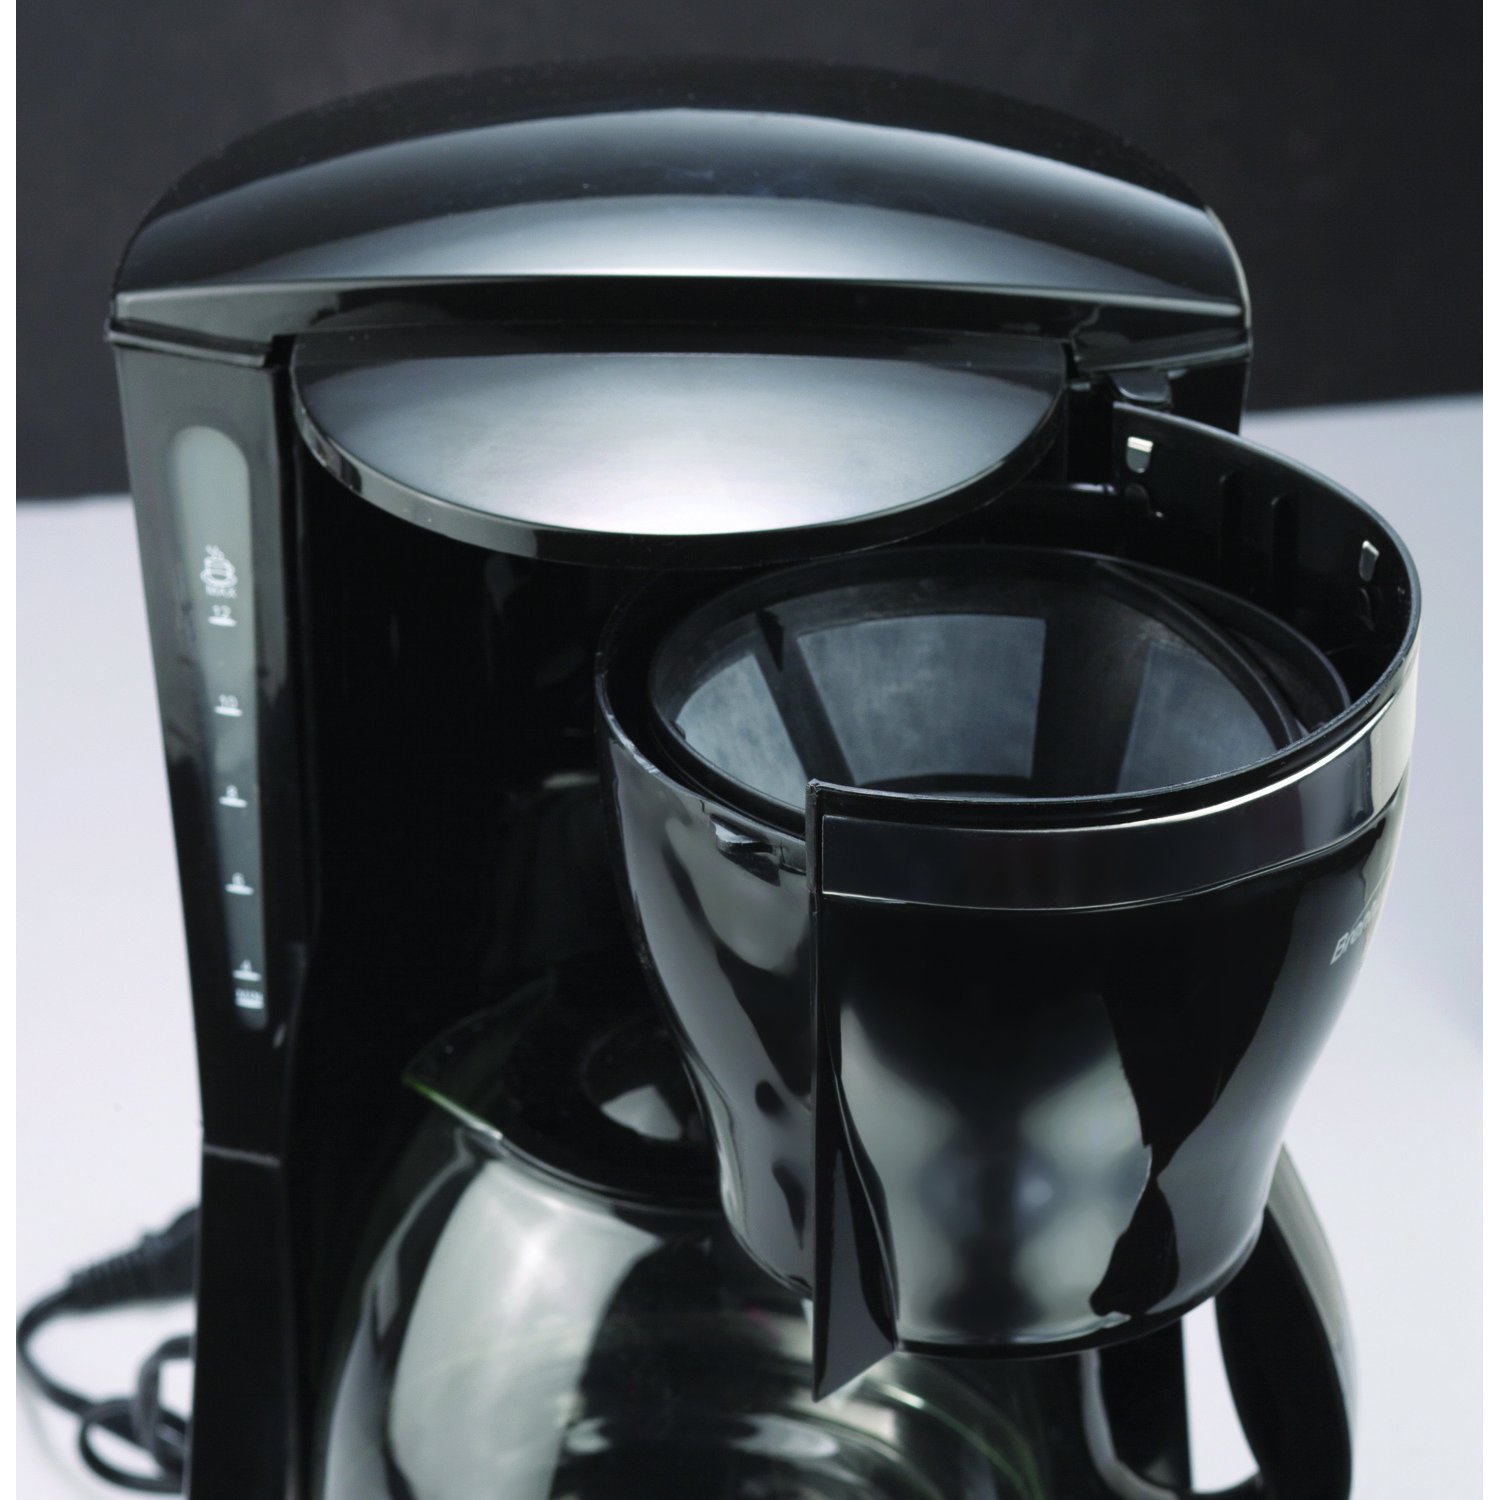 Brentwood Coffee Cup Maker Black